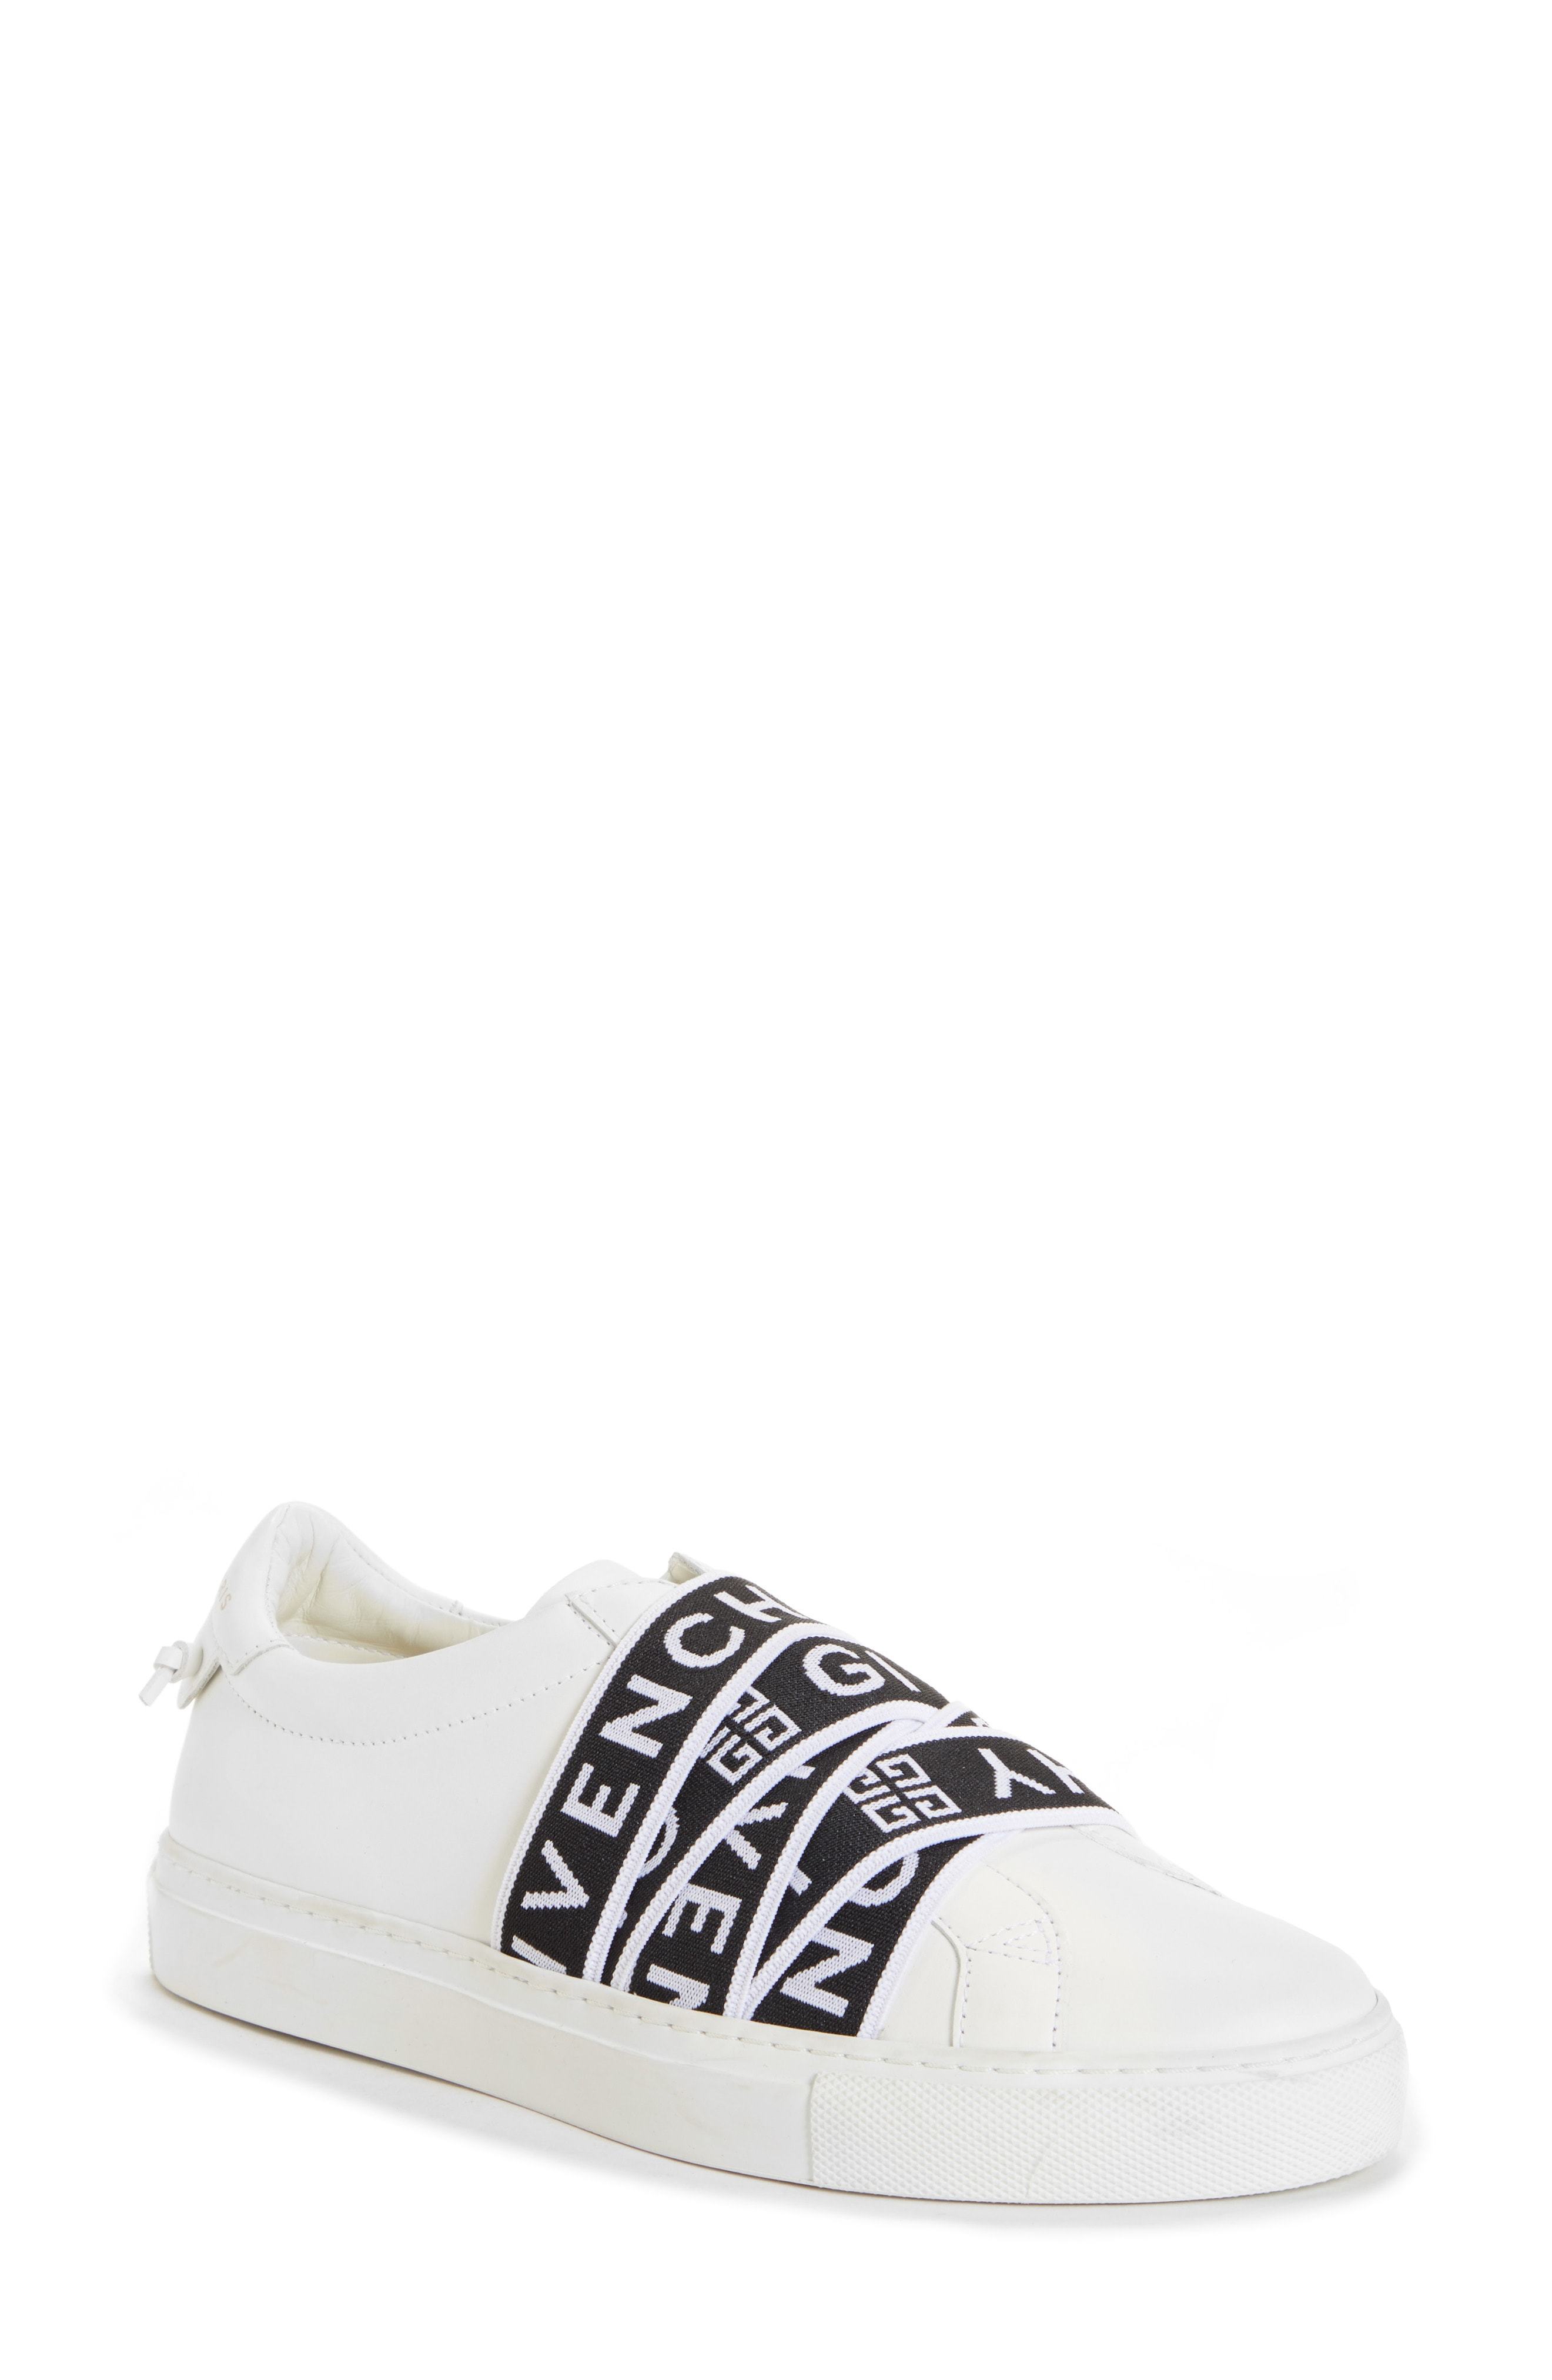 Givenchy Trainers Sneakers Elastic Logo Knot Urban Steet White/Navy RRP  £450 New | eBay